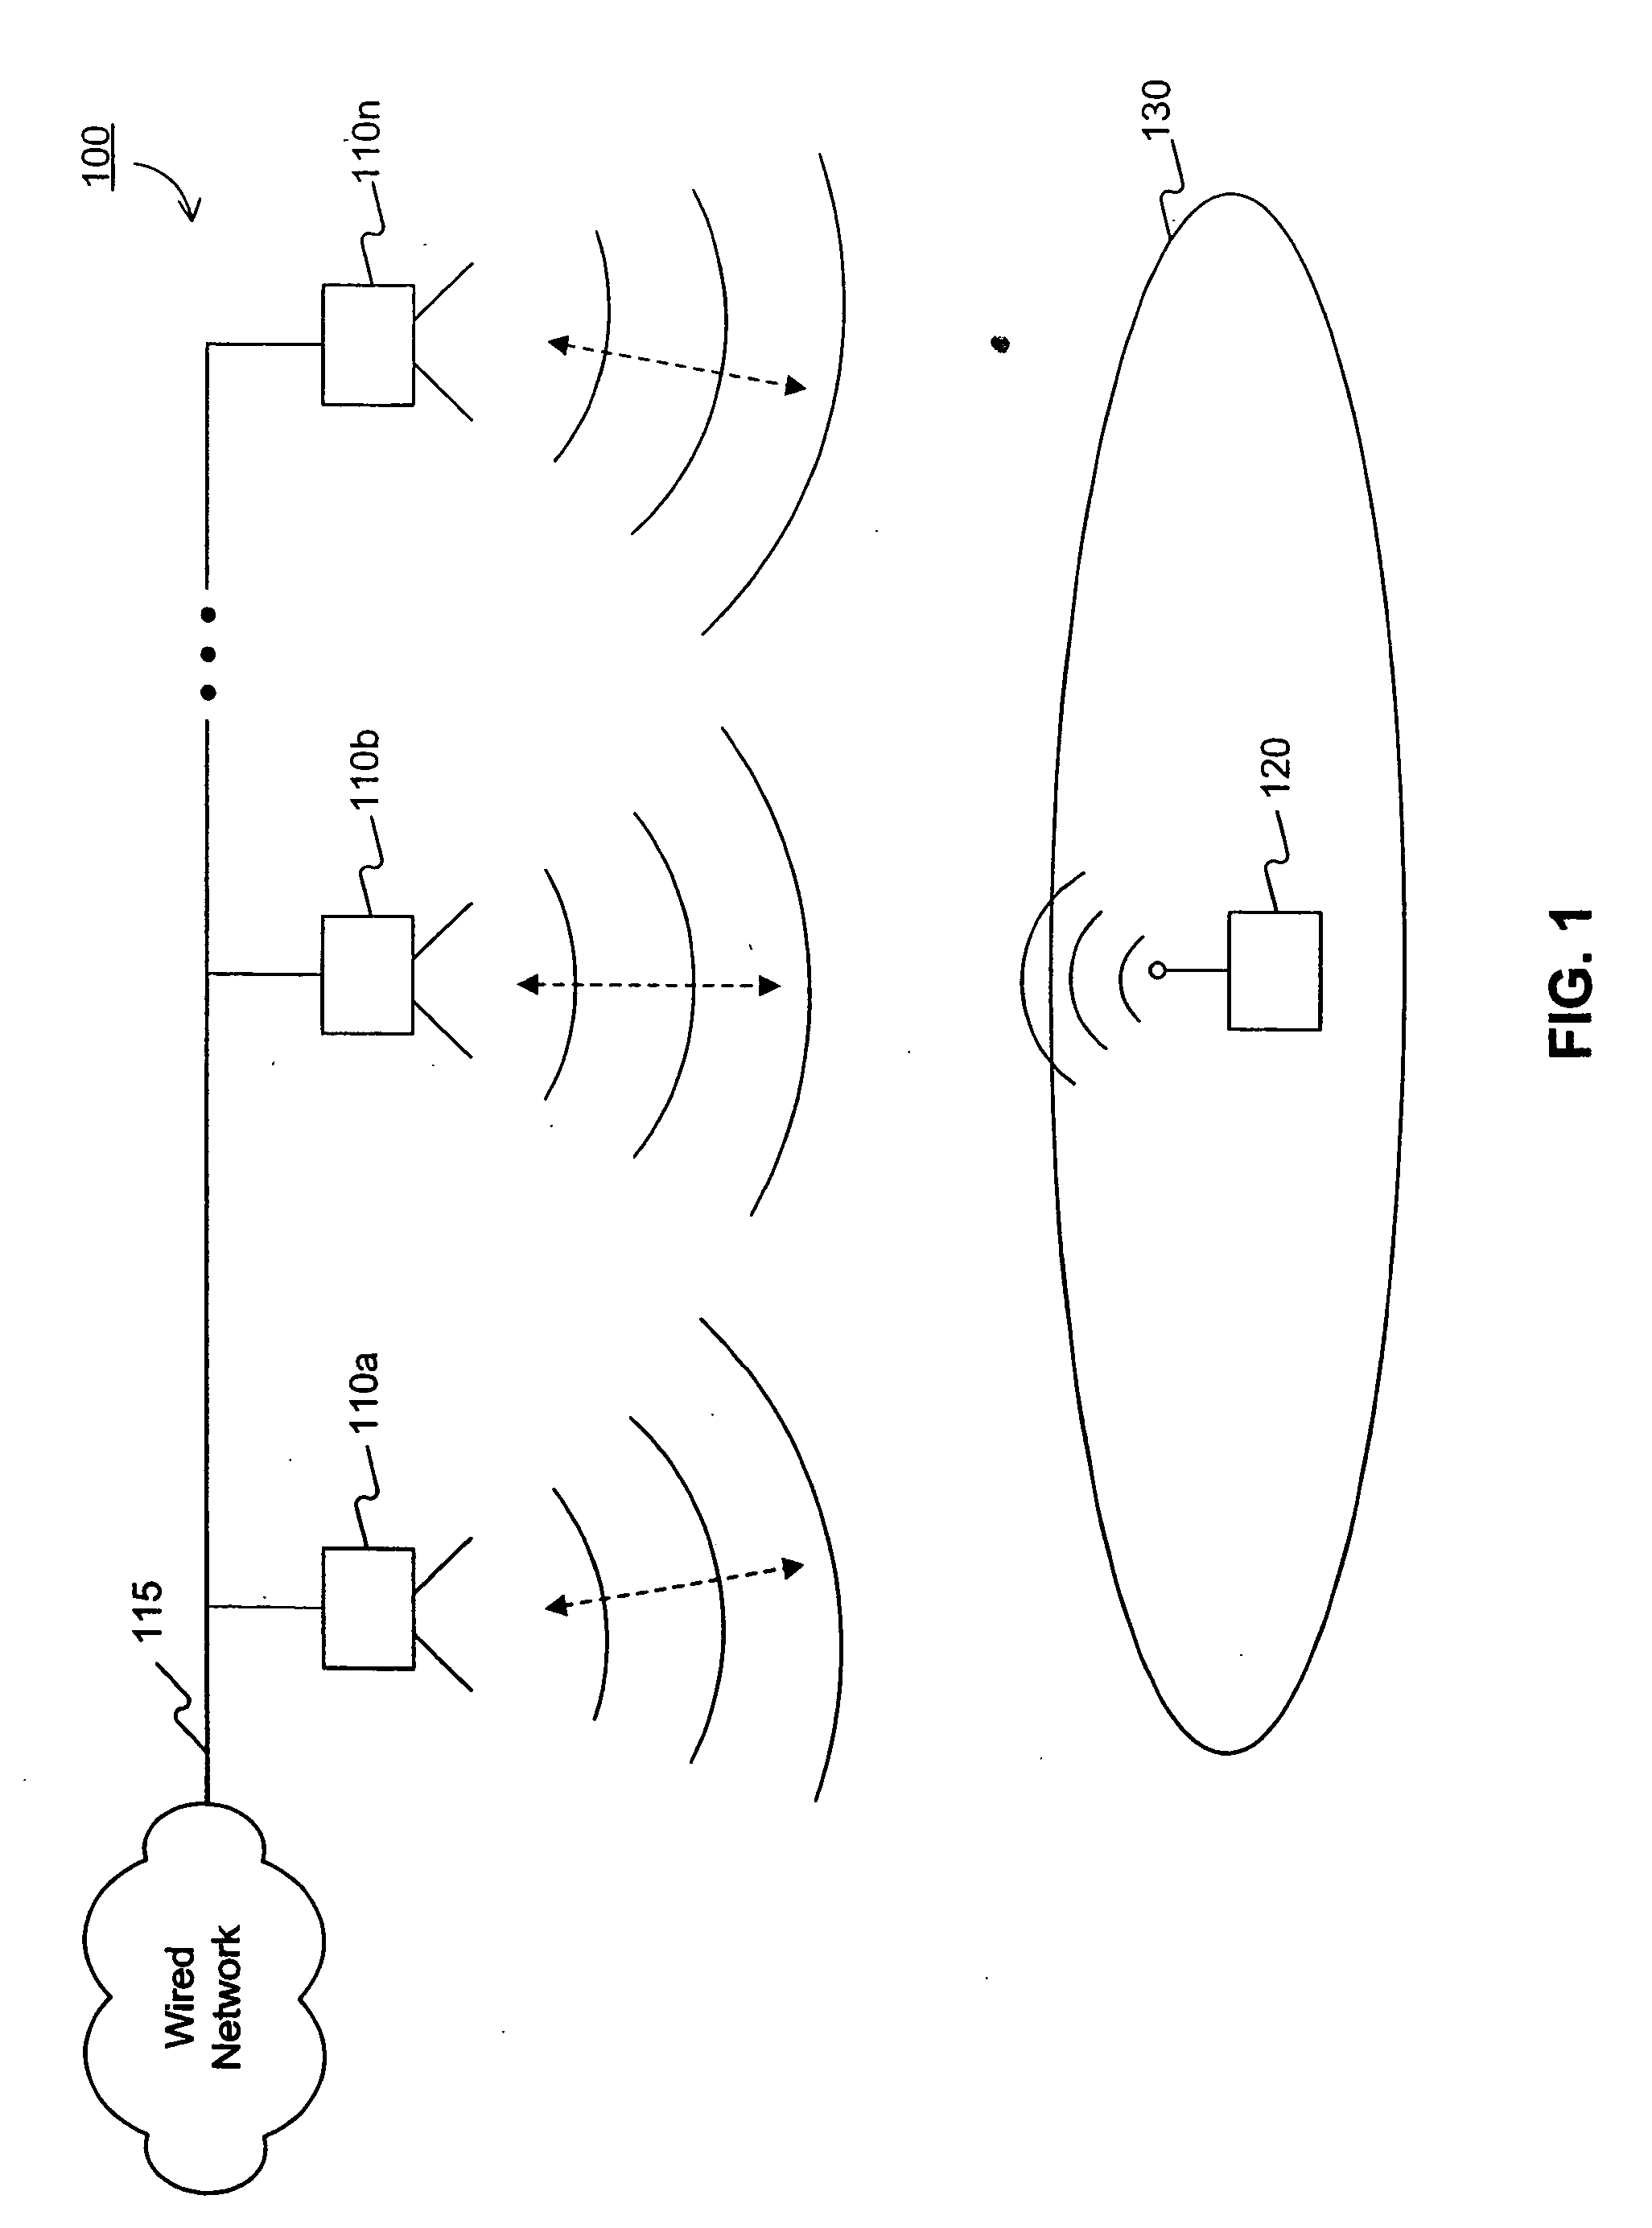 System and methods for redundant networks